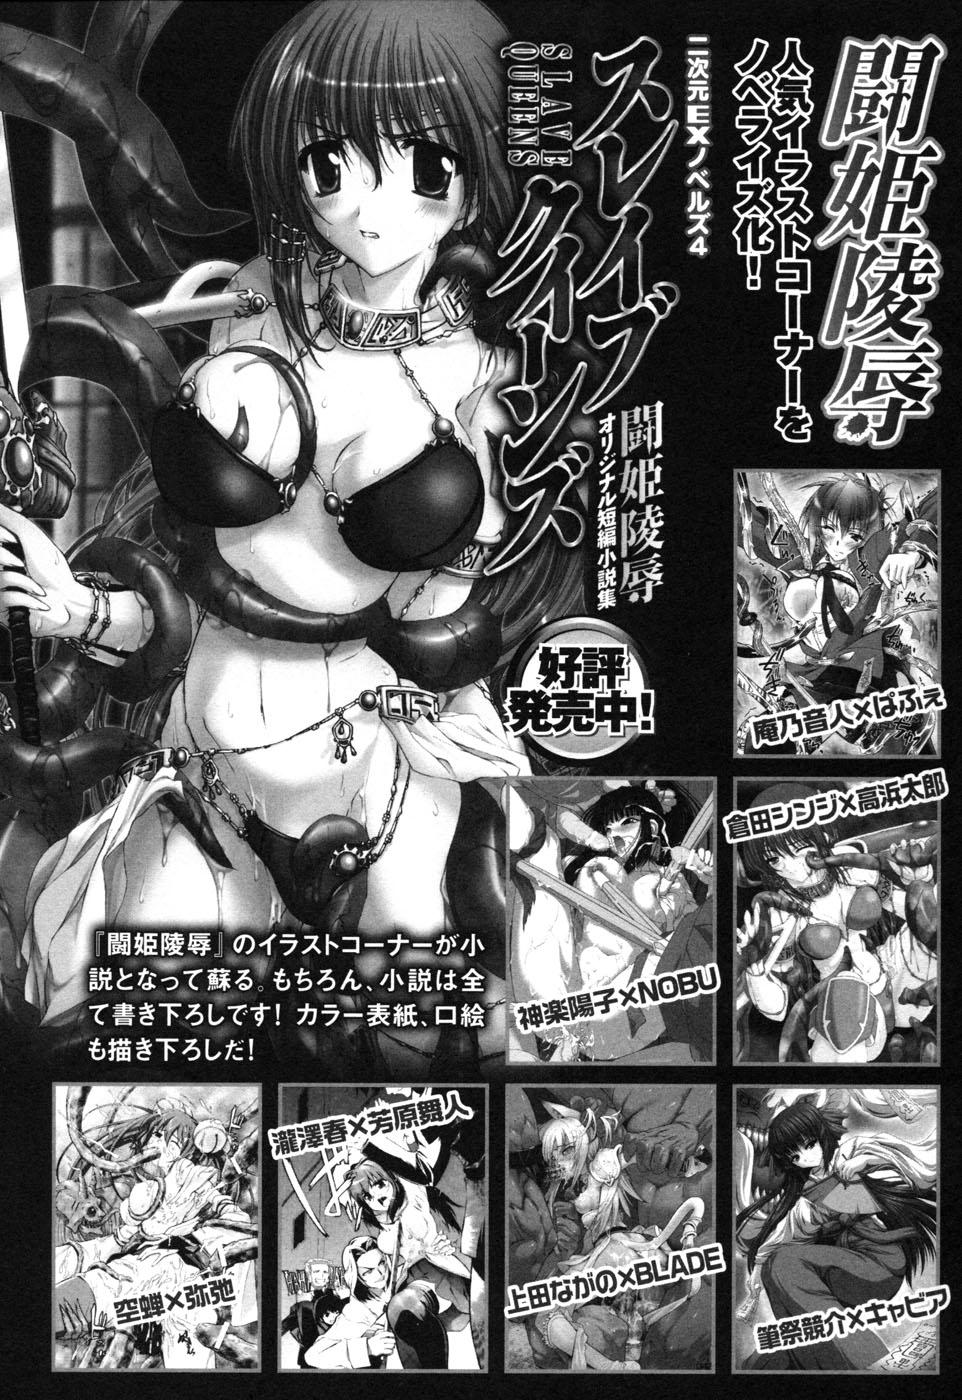 Ametuer Porn Rider Suit Heroine Anthology Comics 2 Old Vs Young - Page 164